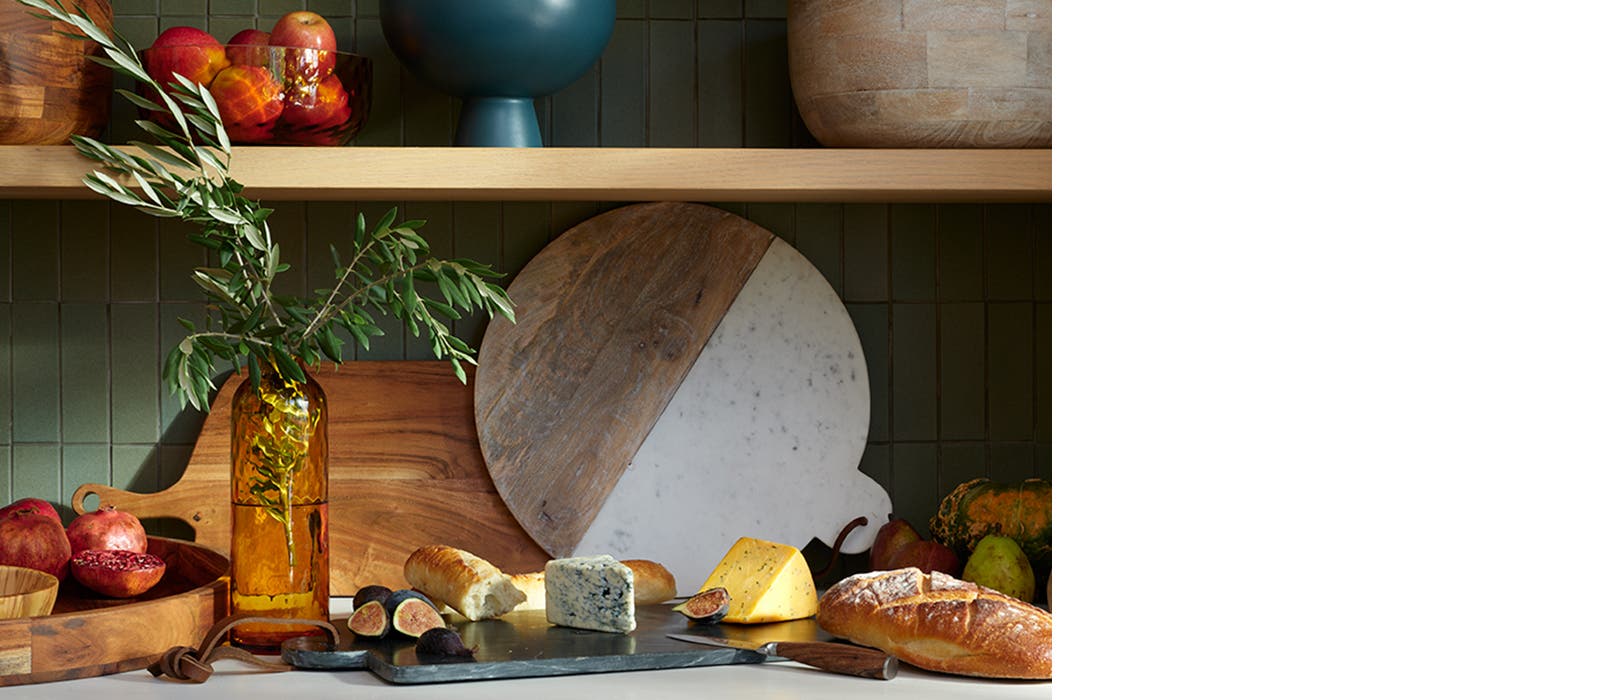 A kitchen counter with cheese, bread, fruit, cutting boards and bowls.